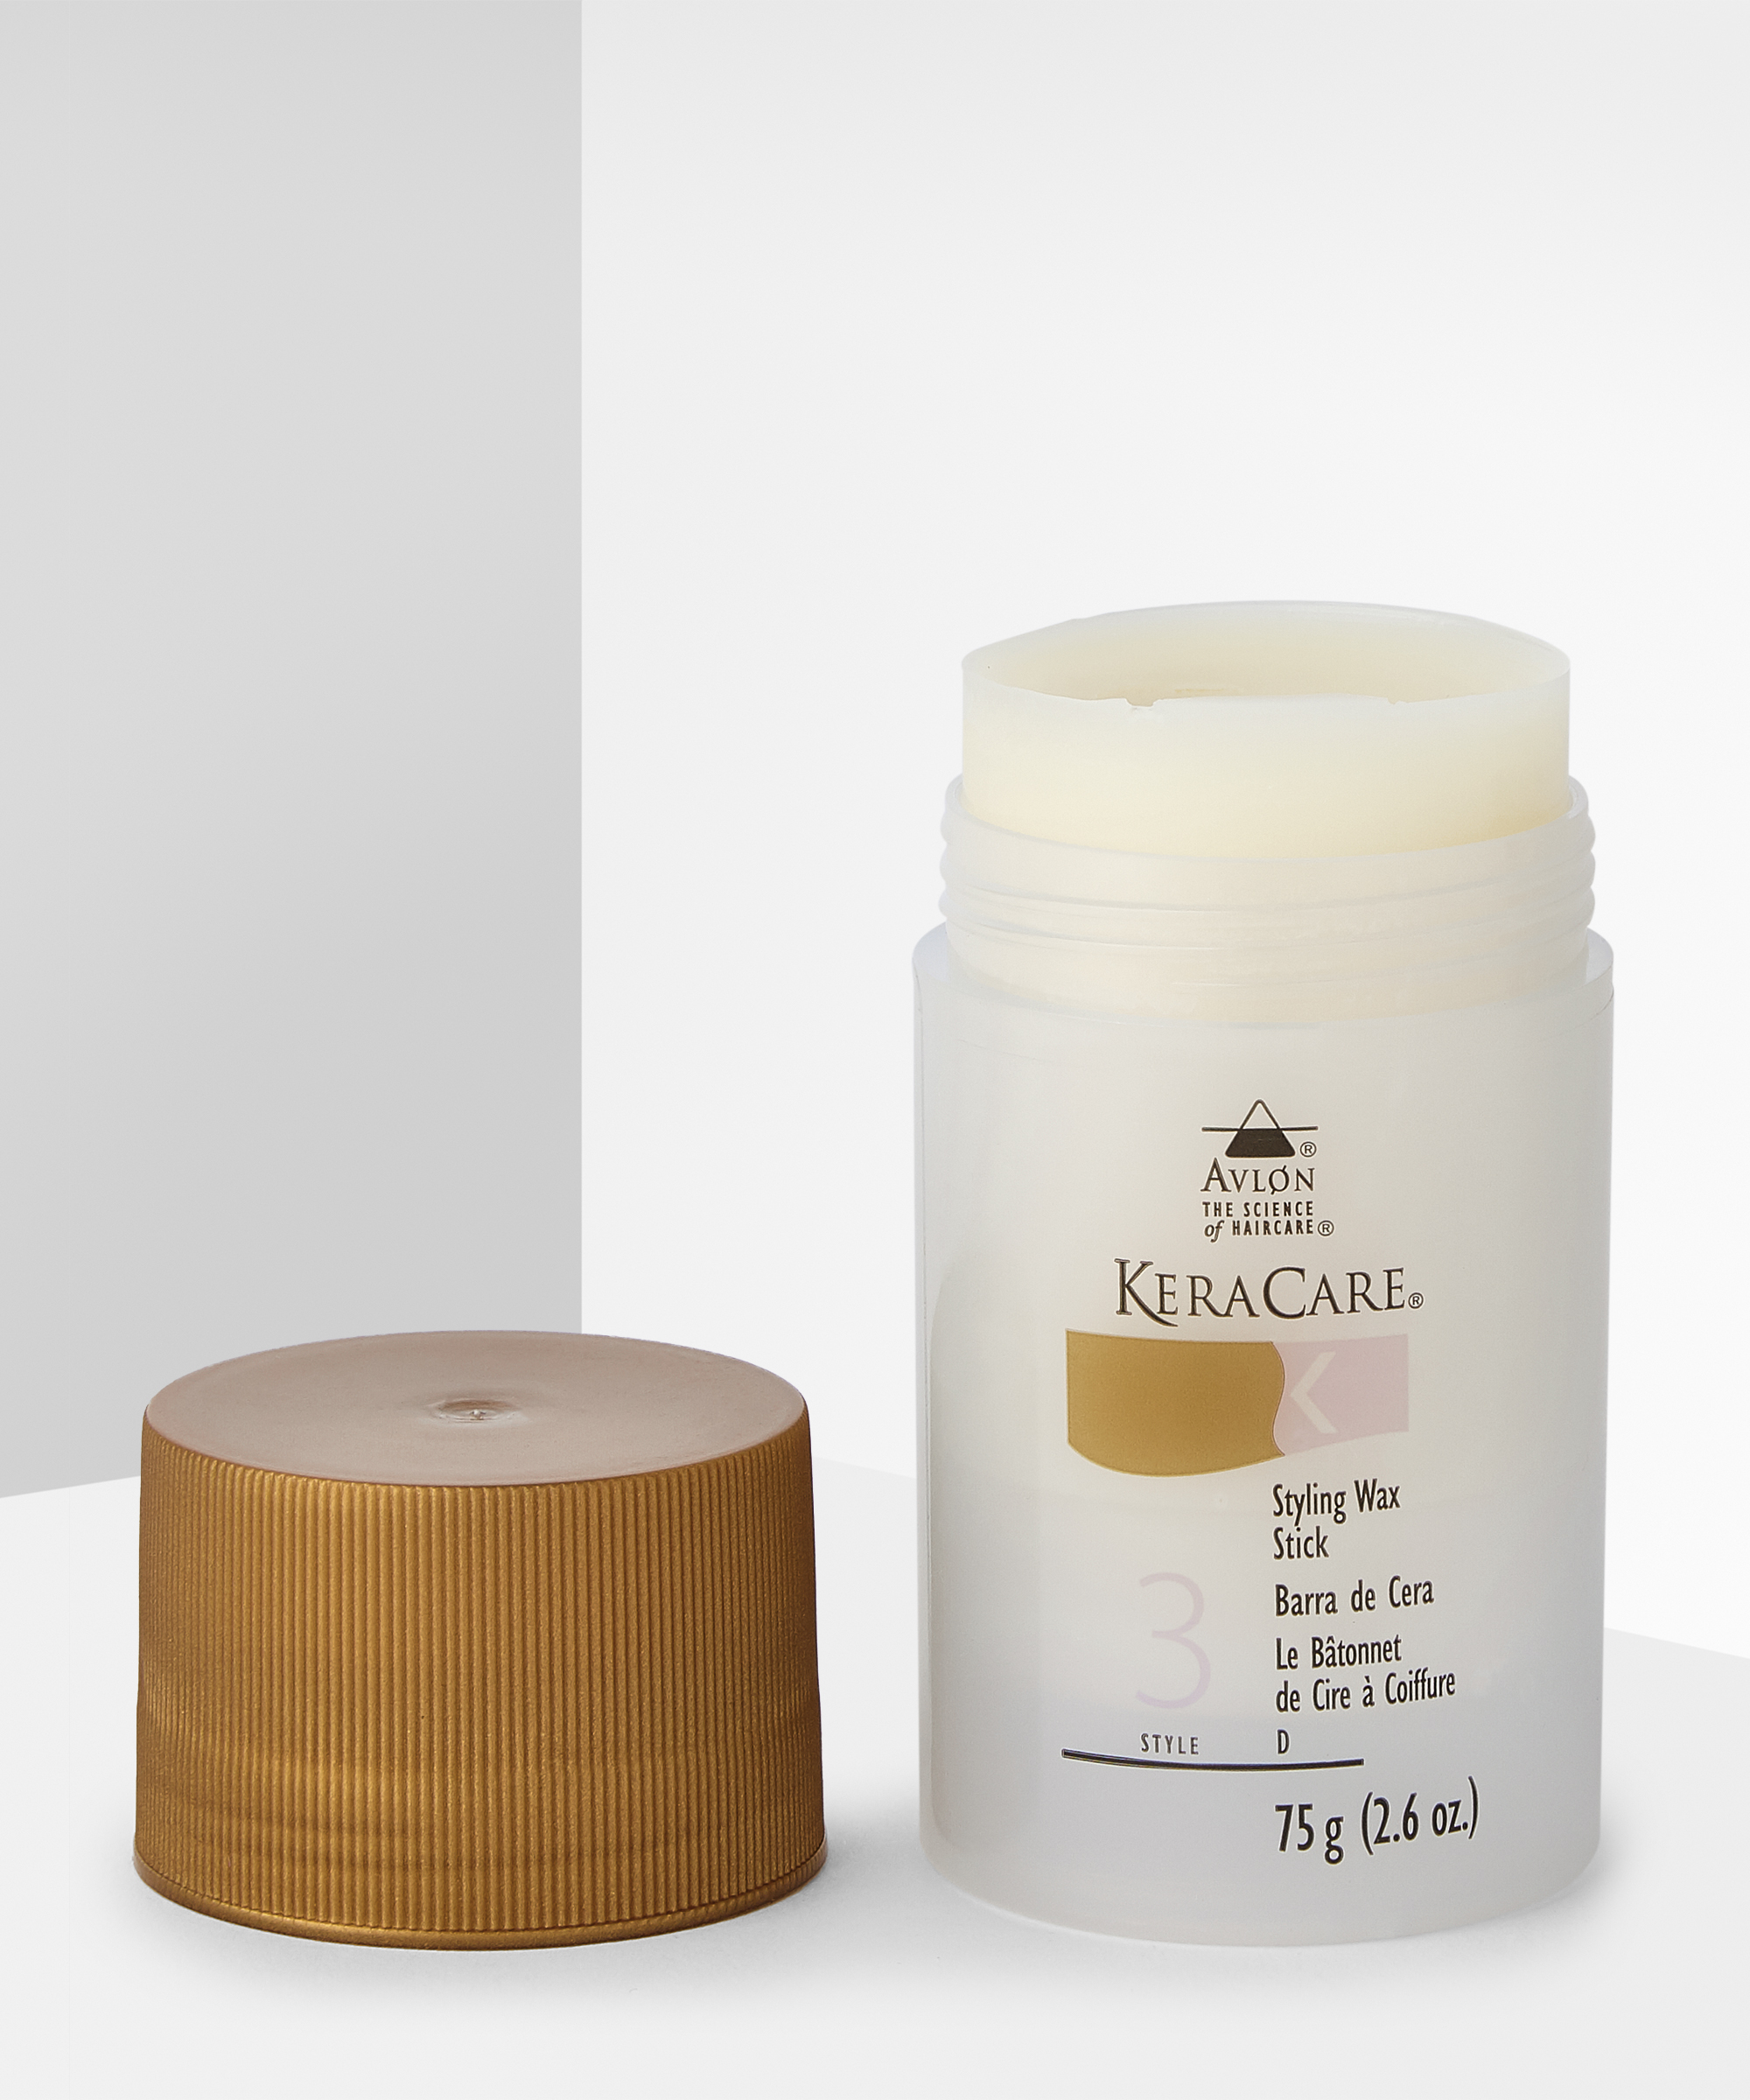 KERA CARE STYLING WAX STICK 2.6 OZ - Professional Beauty Supply Store,  Licensed Professionals Only